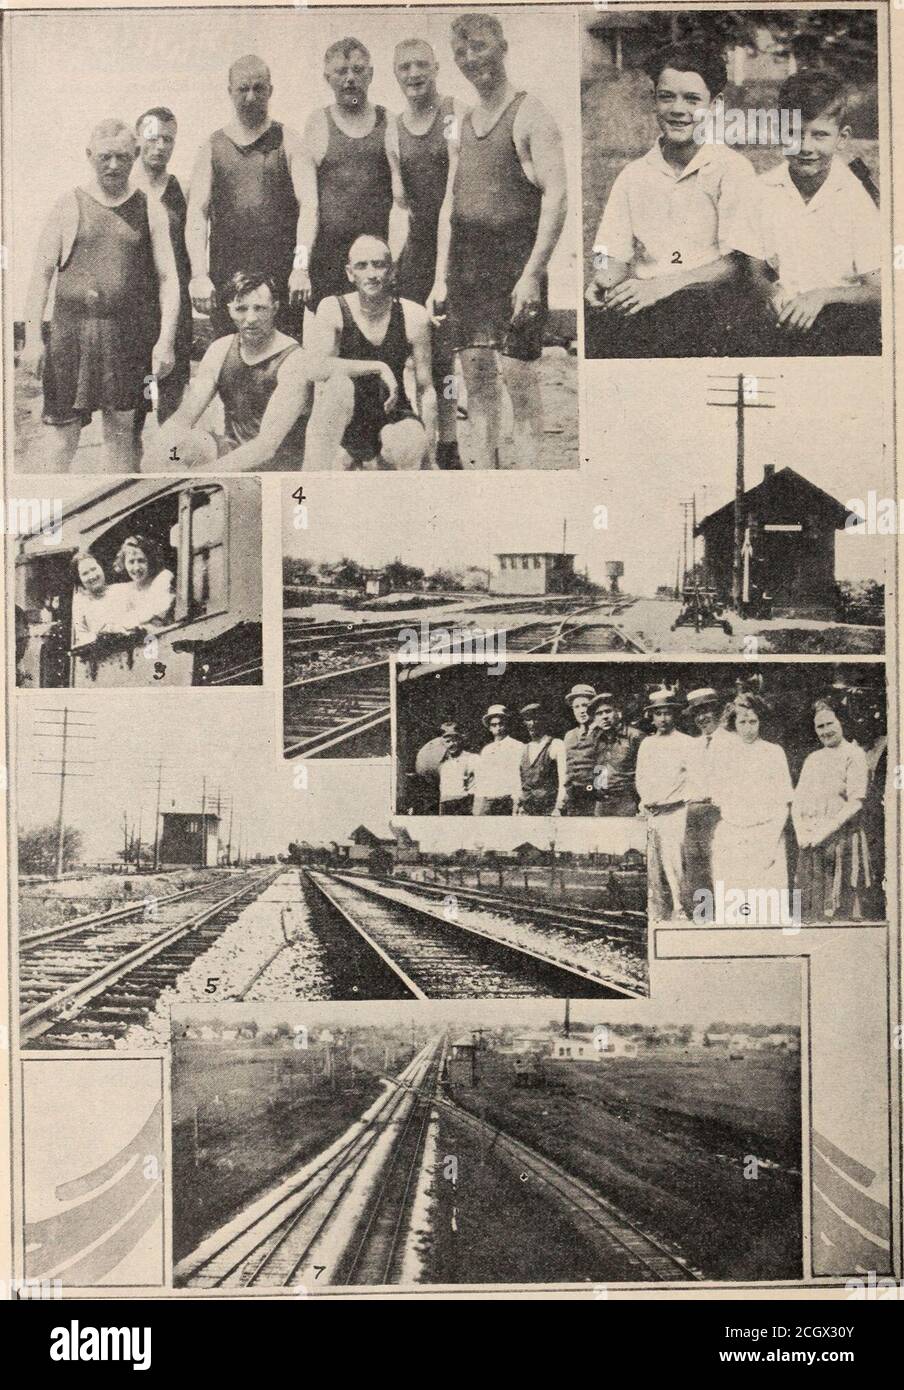 . Baltimore and Ohio employees magazine . INTERESTING PLACES AND PEOPLE ON THE AKRON DIVISIONI. Standing, left to right: Messrs. E. F. Creel, D. A Cassiday, N. R- Butler, J^A. Tschuor A.^^^^ Burdge. 2 Huston and Richard, sons of Assistant Trammaster and Mrs. C M. Trufsell A^°°- 3- Masses Margaret^ W^^ Grfenwich, Ohio. D^Per^! TolTV^ G^^HagLTaP ^^e^lZ R. cc™ wf. ^arrl^; Si R^rut.er. Mse1Sfa7gLjeTsullivan and Margaret Weinberg.6. M. D.Pero, E. W. GaHagJie^ A.^P.^ Z^^^^^^ Operator J. E. Hiester is in charge of the tower seen .n this photograph EasytoPlay I- Easy to Pay Baltimore and Ohio Magazin Stock Photo